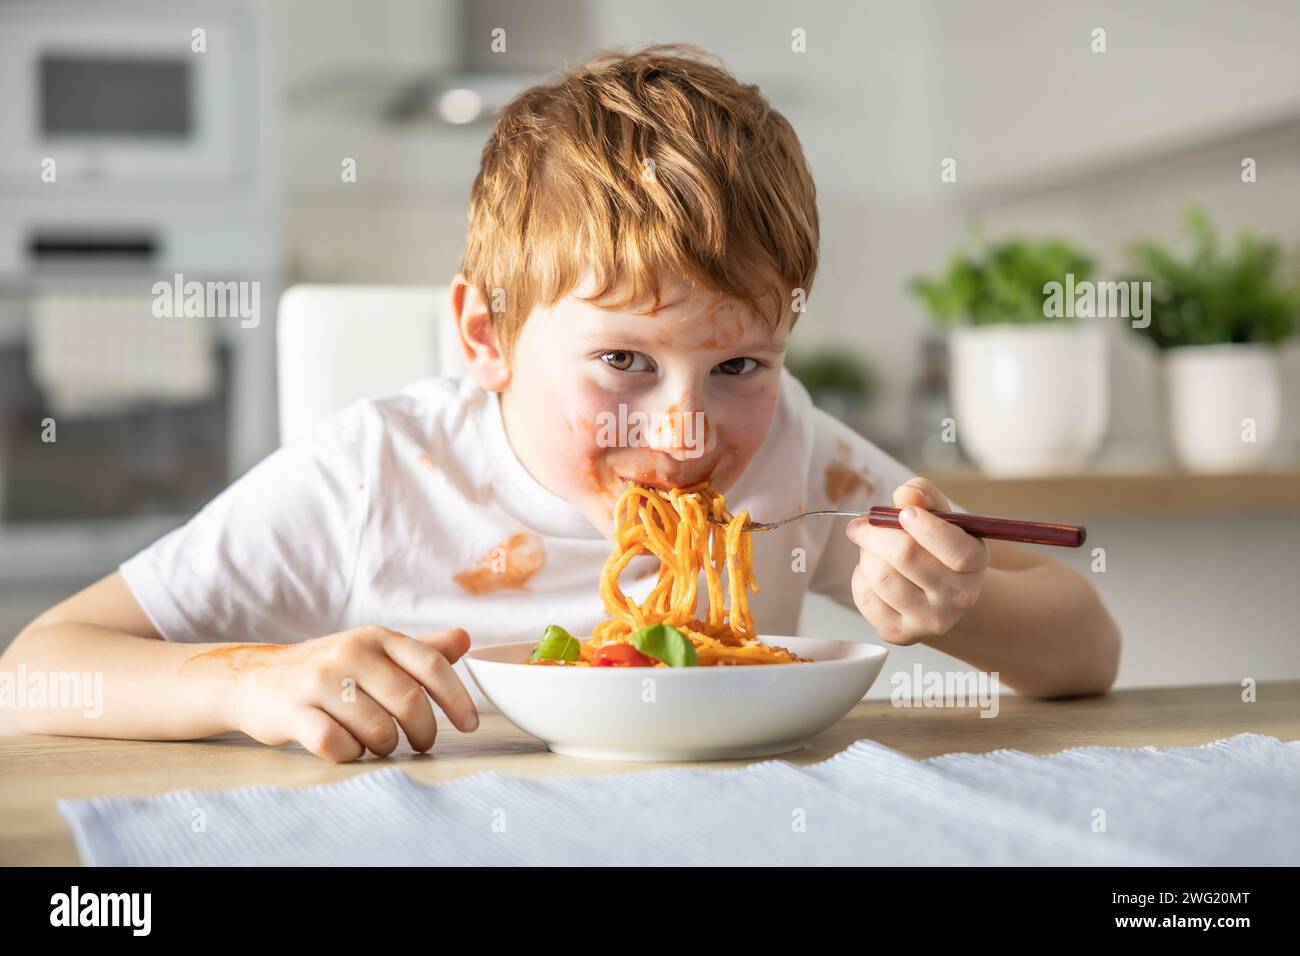 A cute little boy is eating spaghetti bolognese for lunch in the kitchen at home and is covered in ketchup. Stock Photo